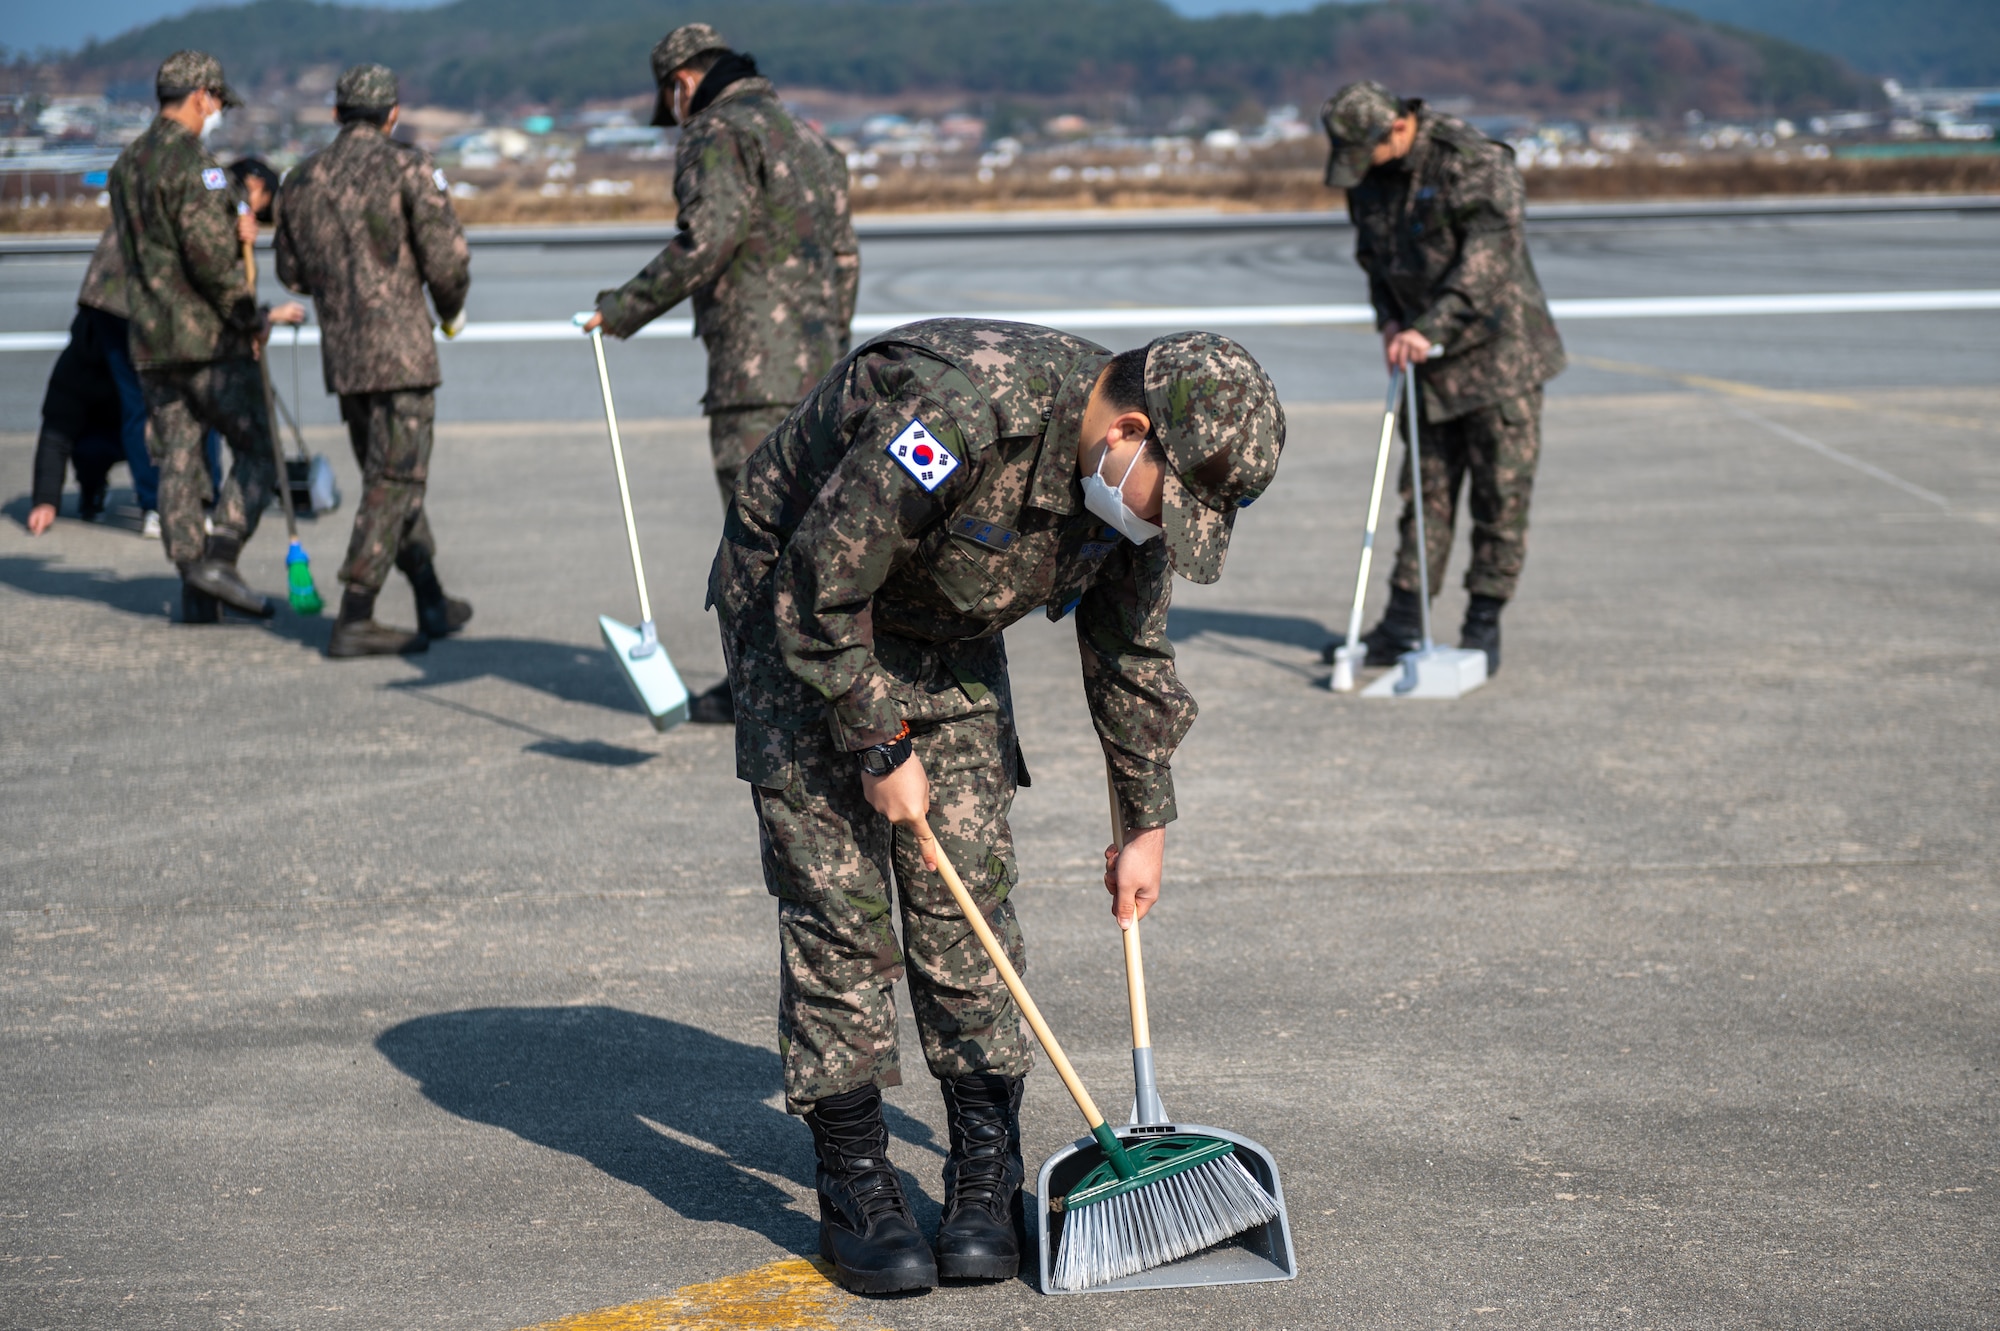 Republic of Korea Air Force members clear the area of debris, also known as foreign object disposal (FOD), at an emergency landing strip as part of a combined training event involving USAF and Republic of Korea Air Force partners